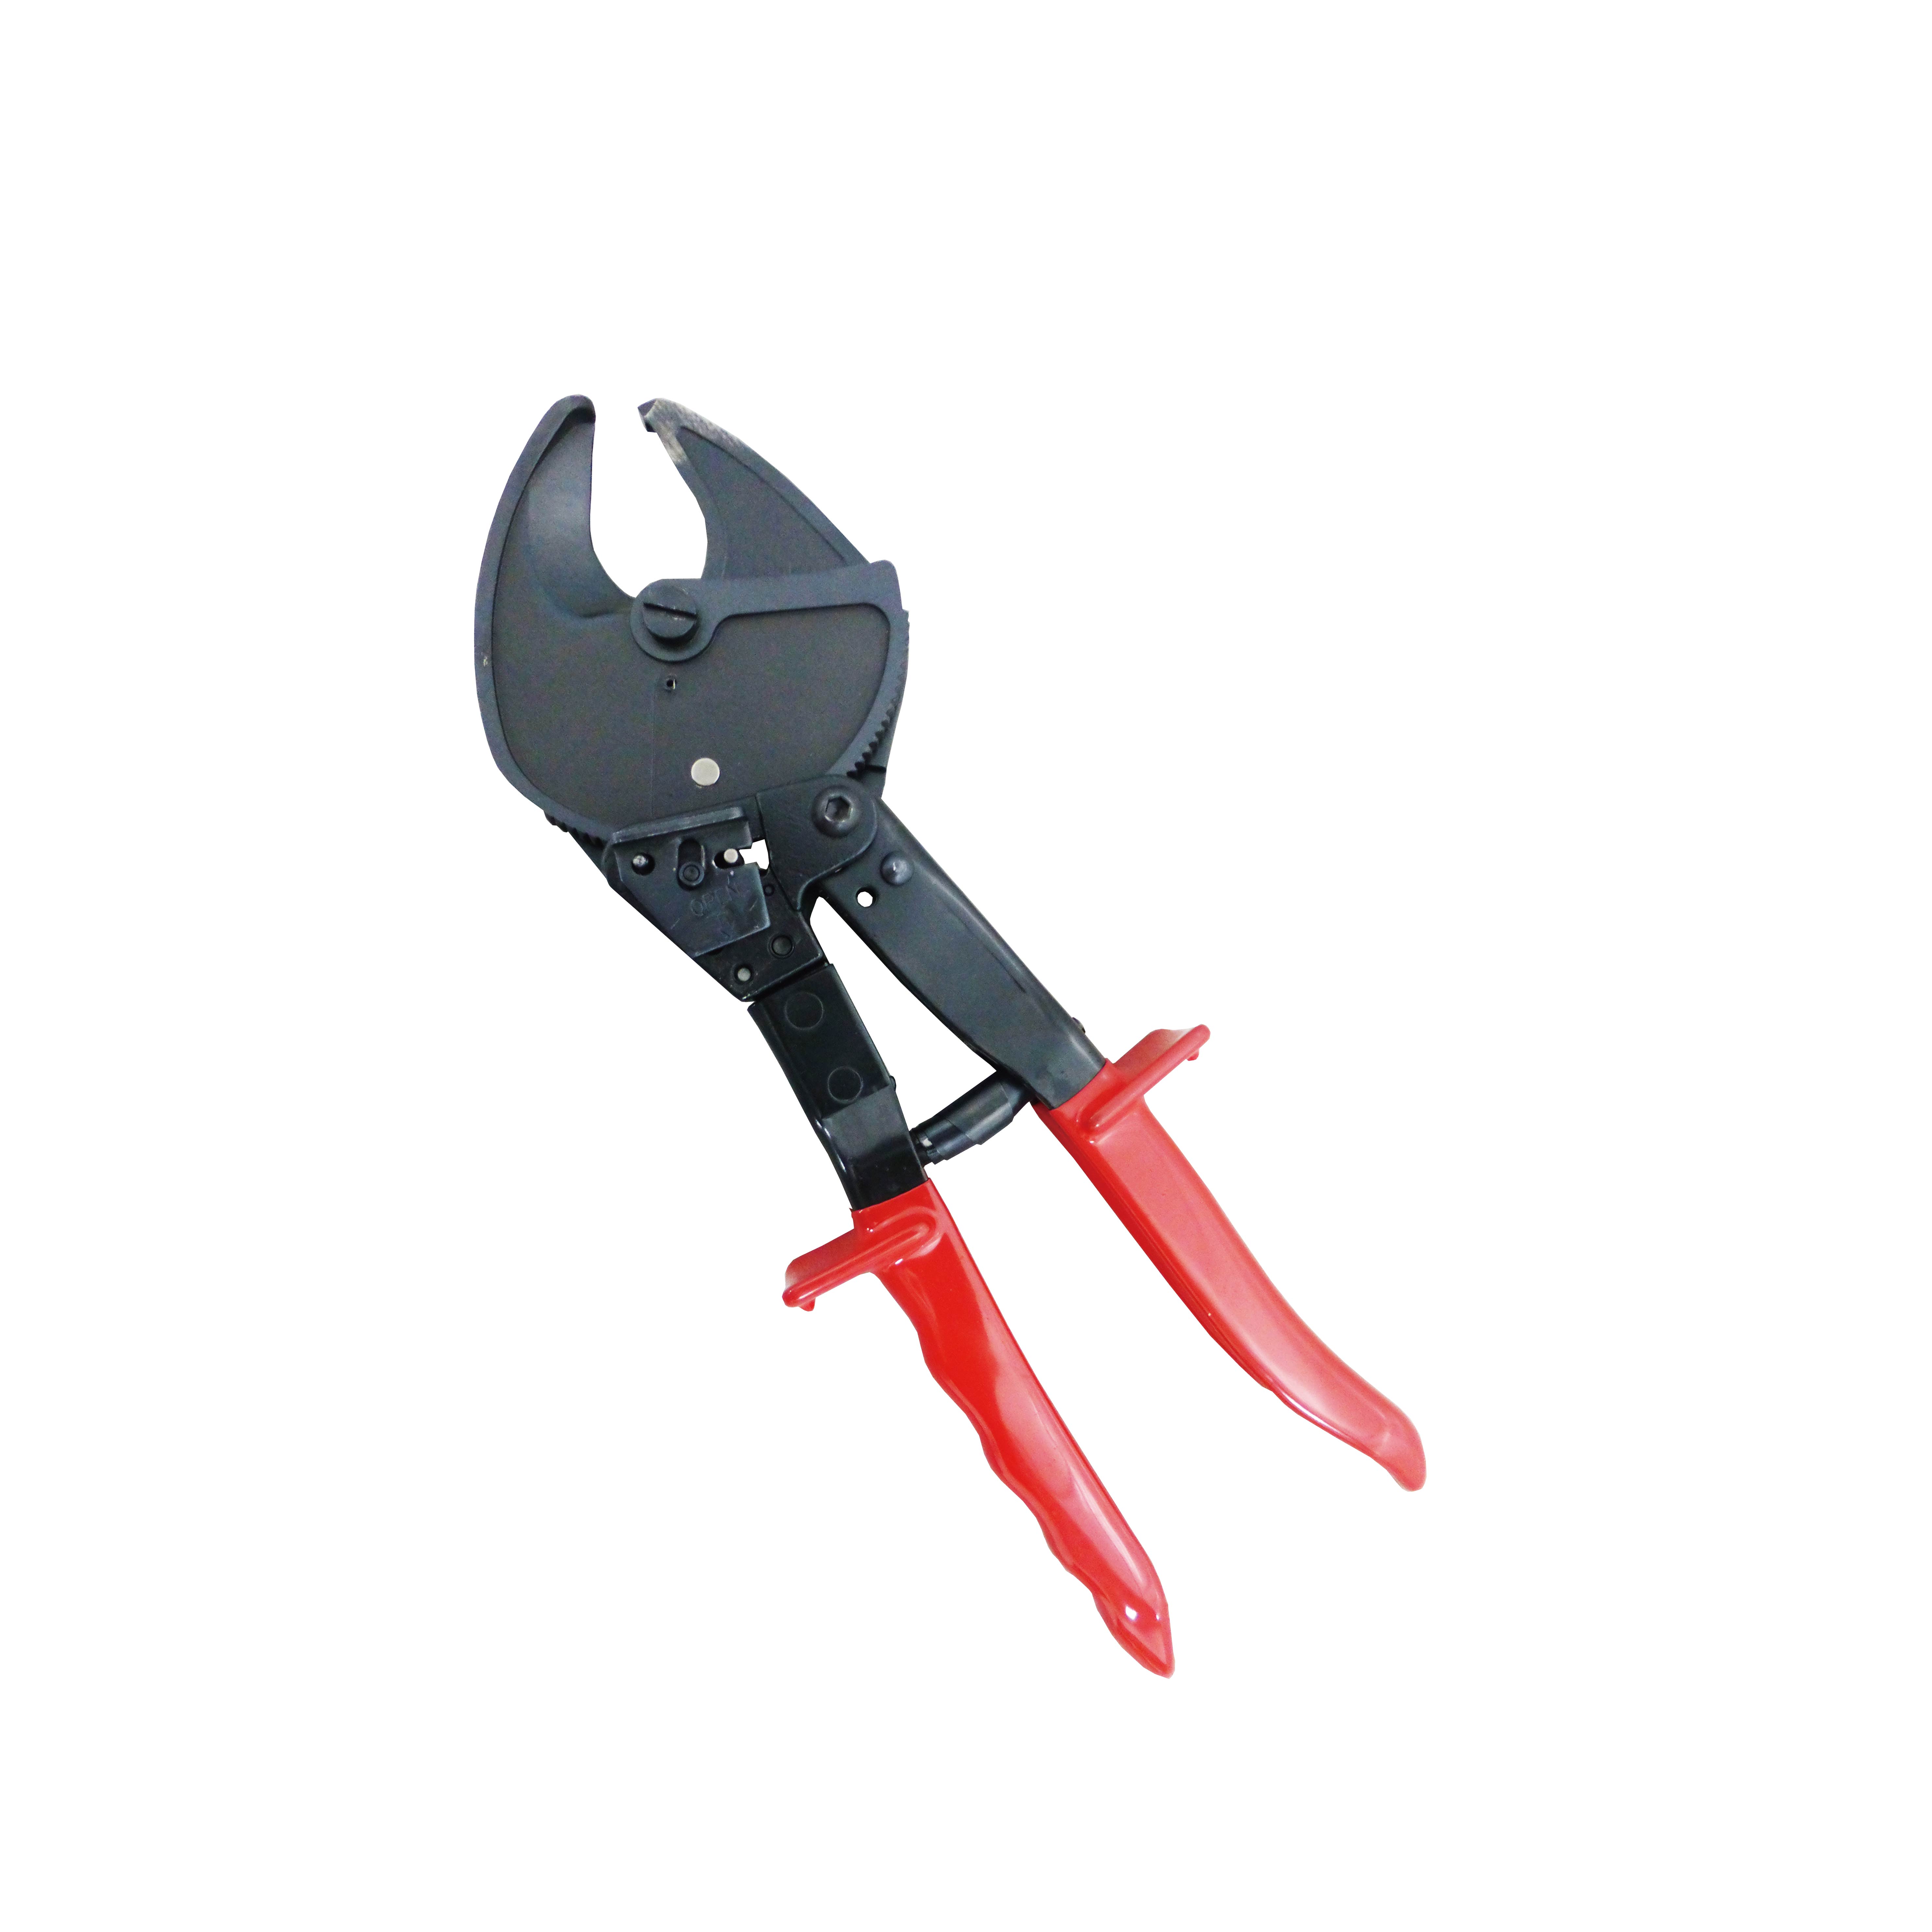 LK-325Y HAND CABLE CUTTERS-LK-325Y 